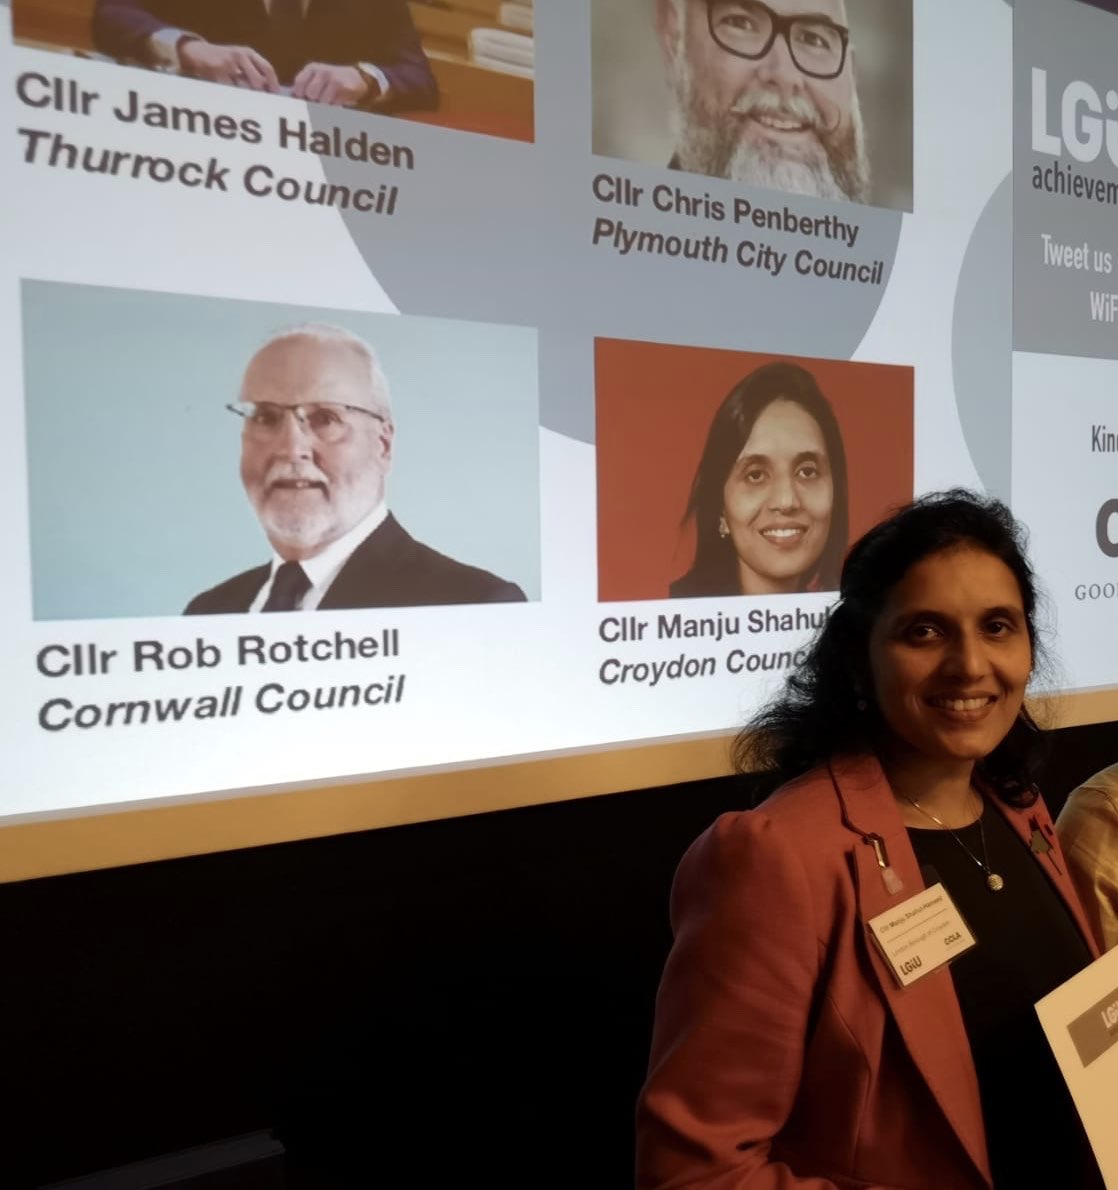 Honoured to be shortlisted for @LGiU #Innovation and #ServiceTransformation #CllrAwards19 .  Heartfelt thanks to everyone who nominated me. @yourcroydon